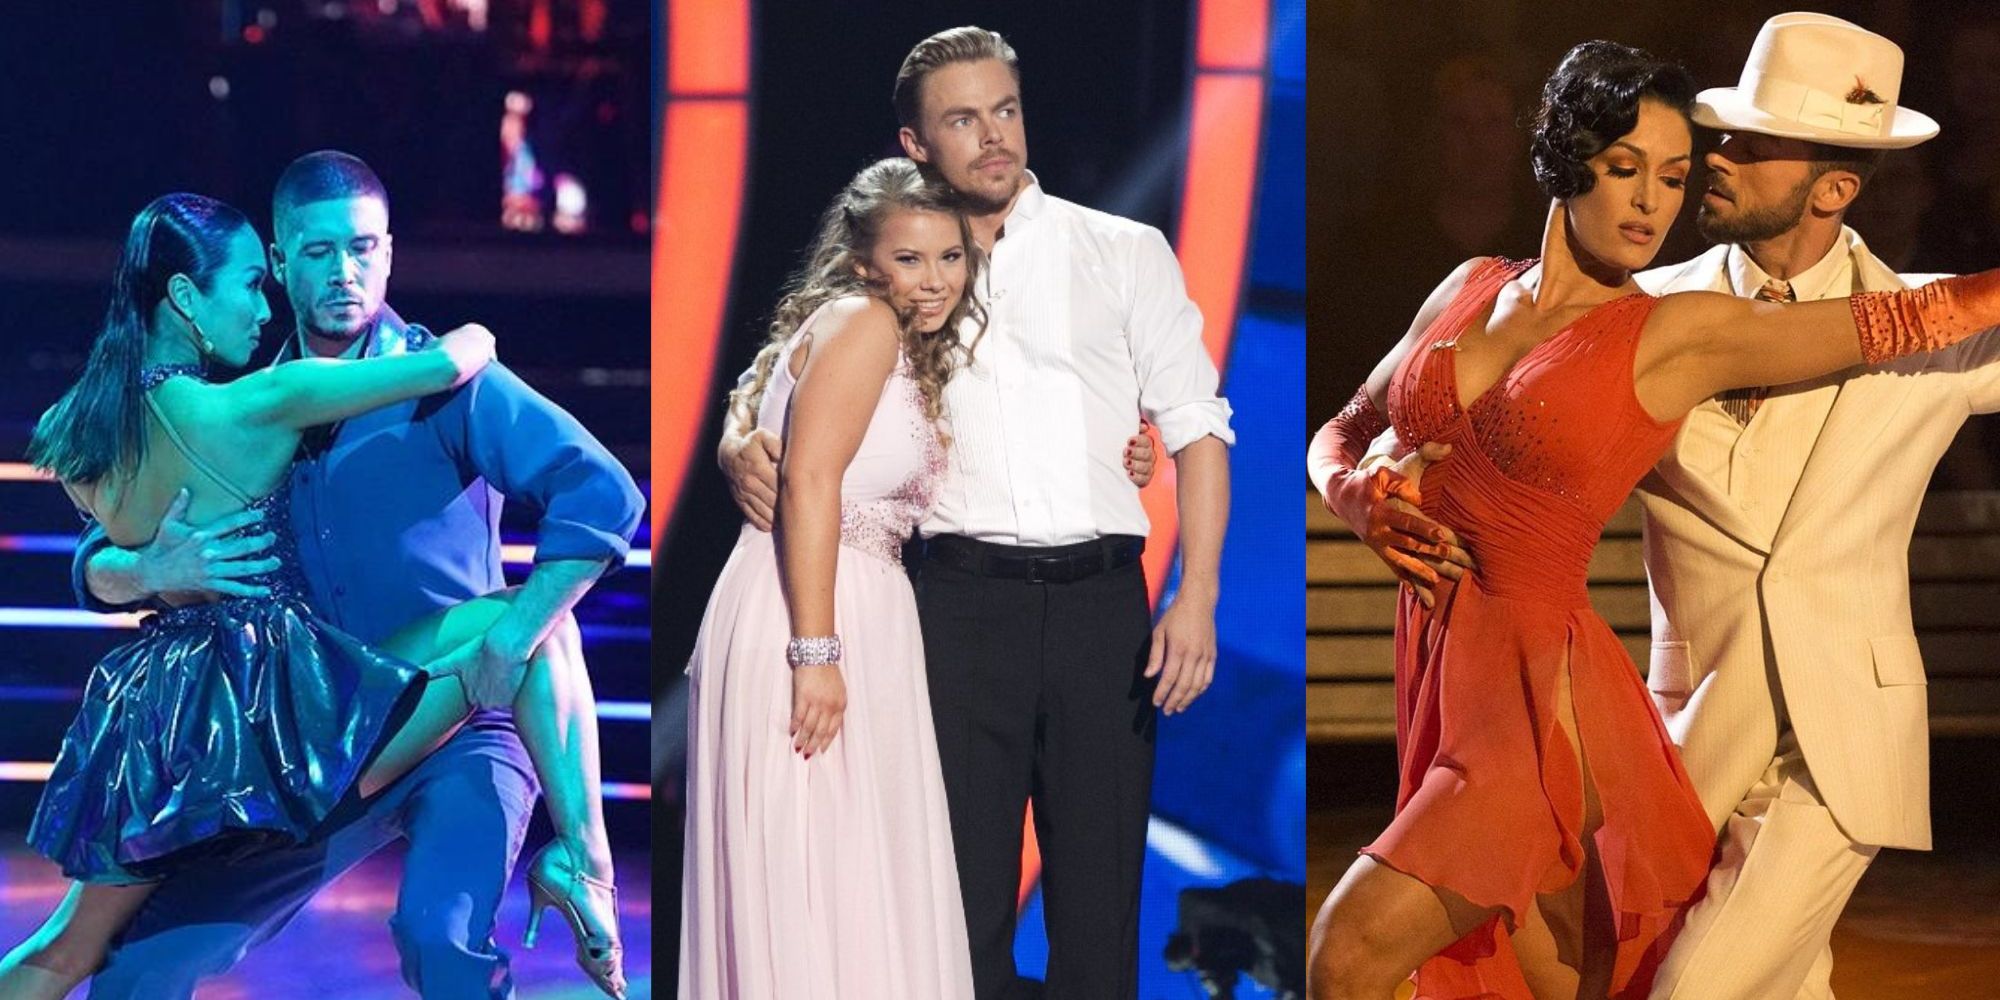 Three images of Vinny and Koko, Bindi and Derek, and Nikki and Artem from DWTS